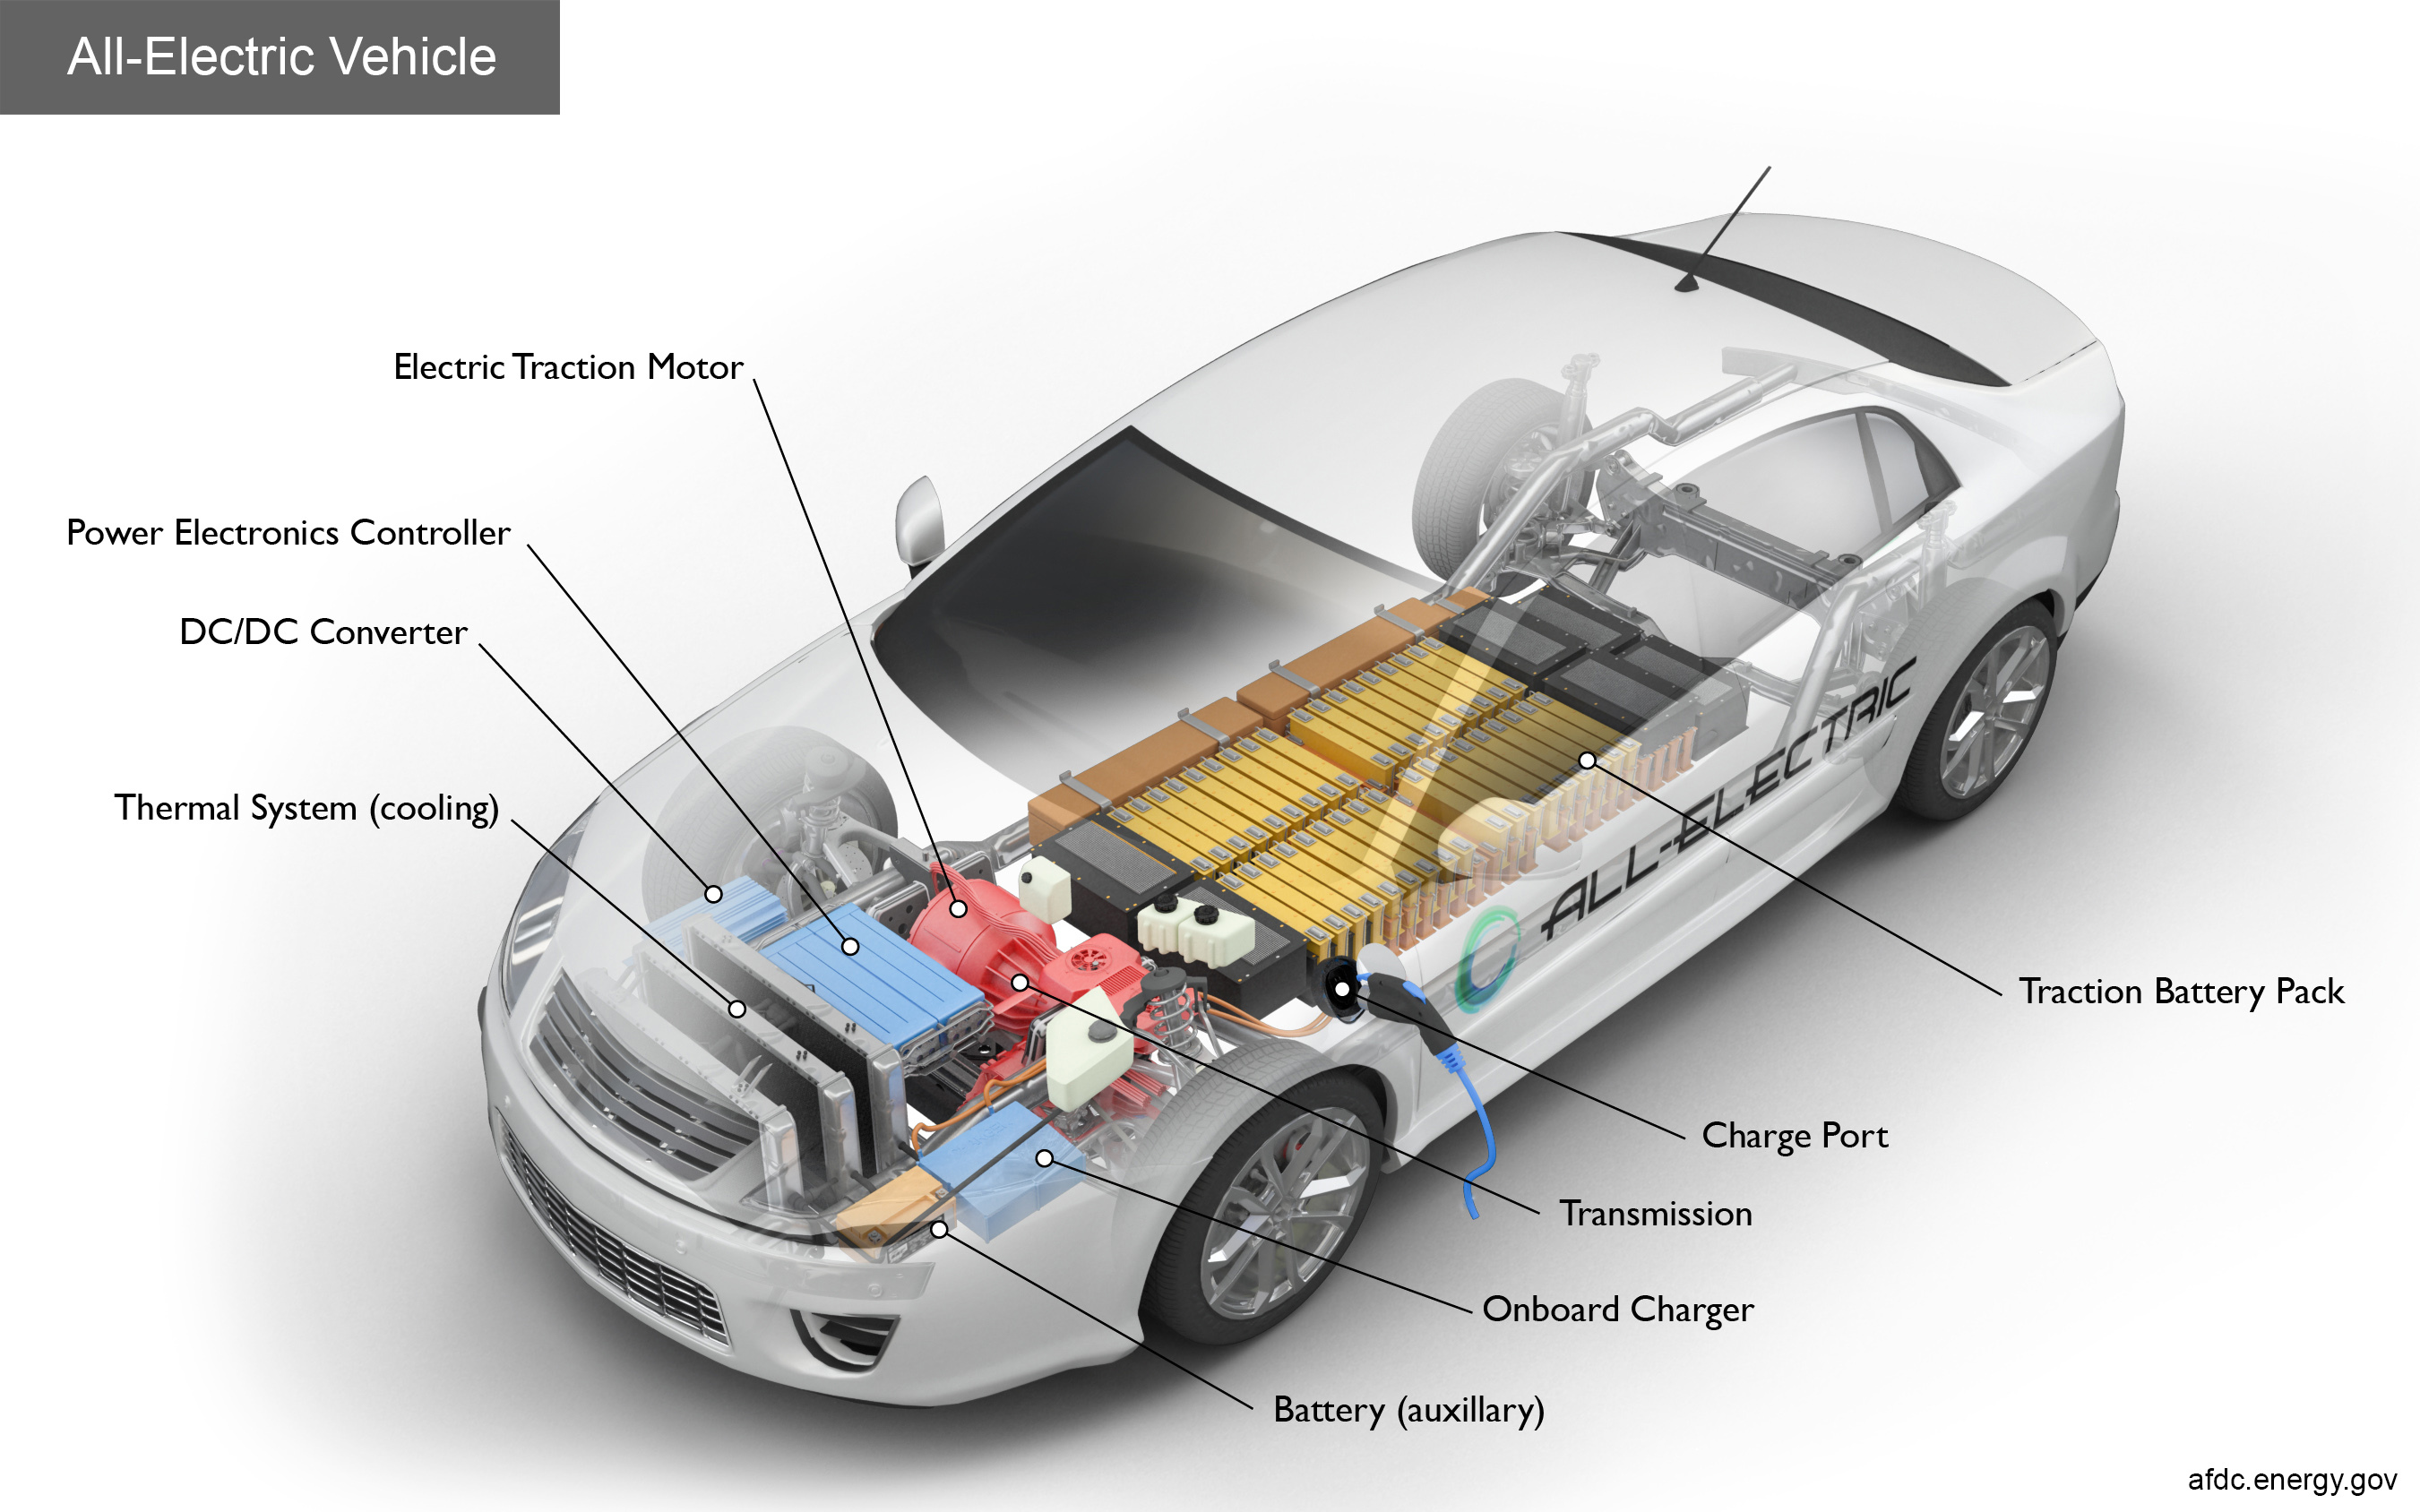 Who makes the batteries for electric vehicles